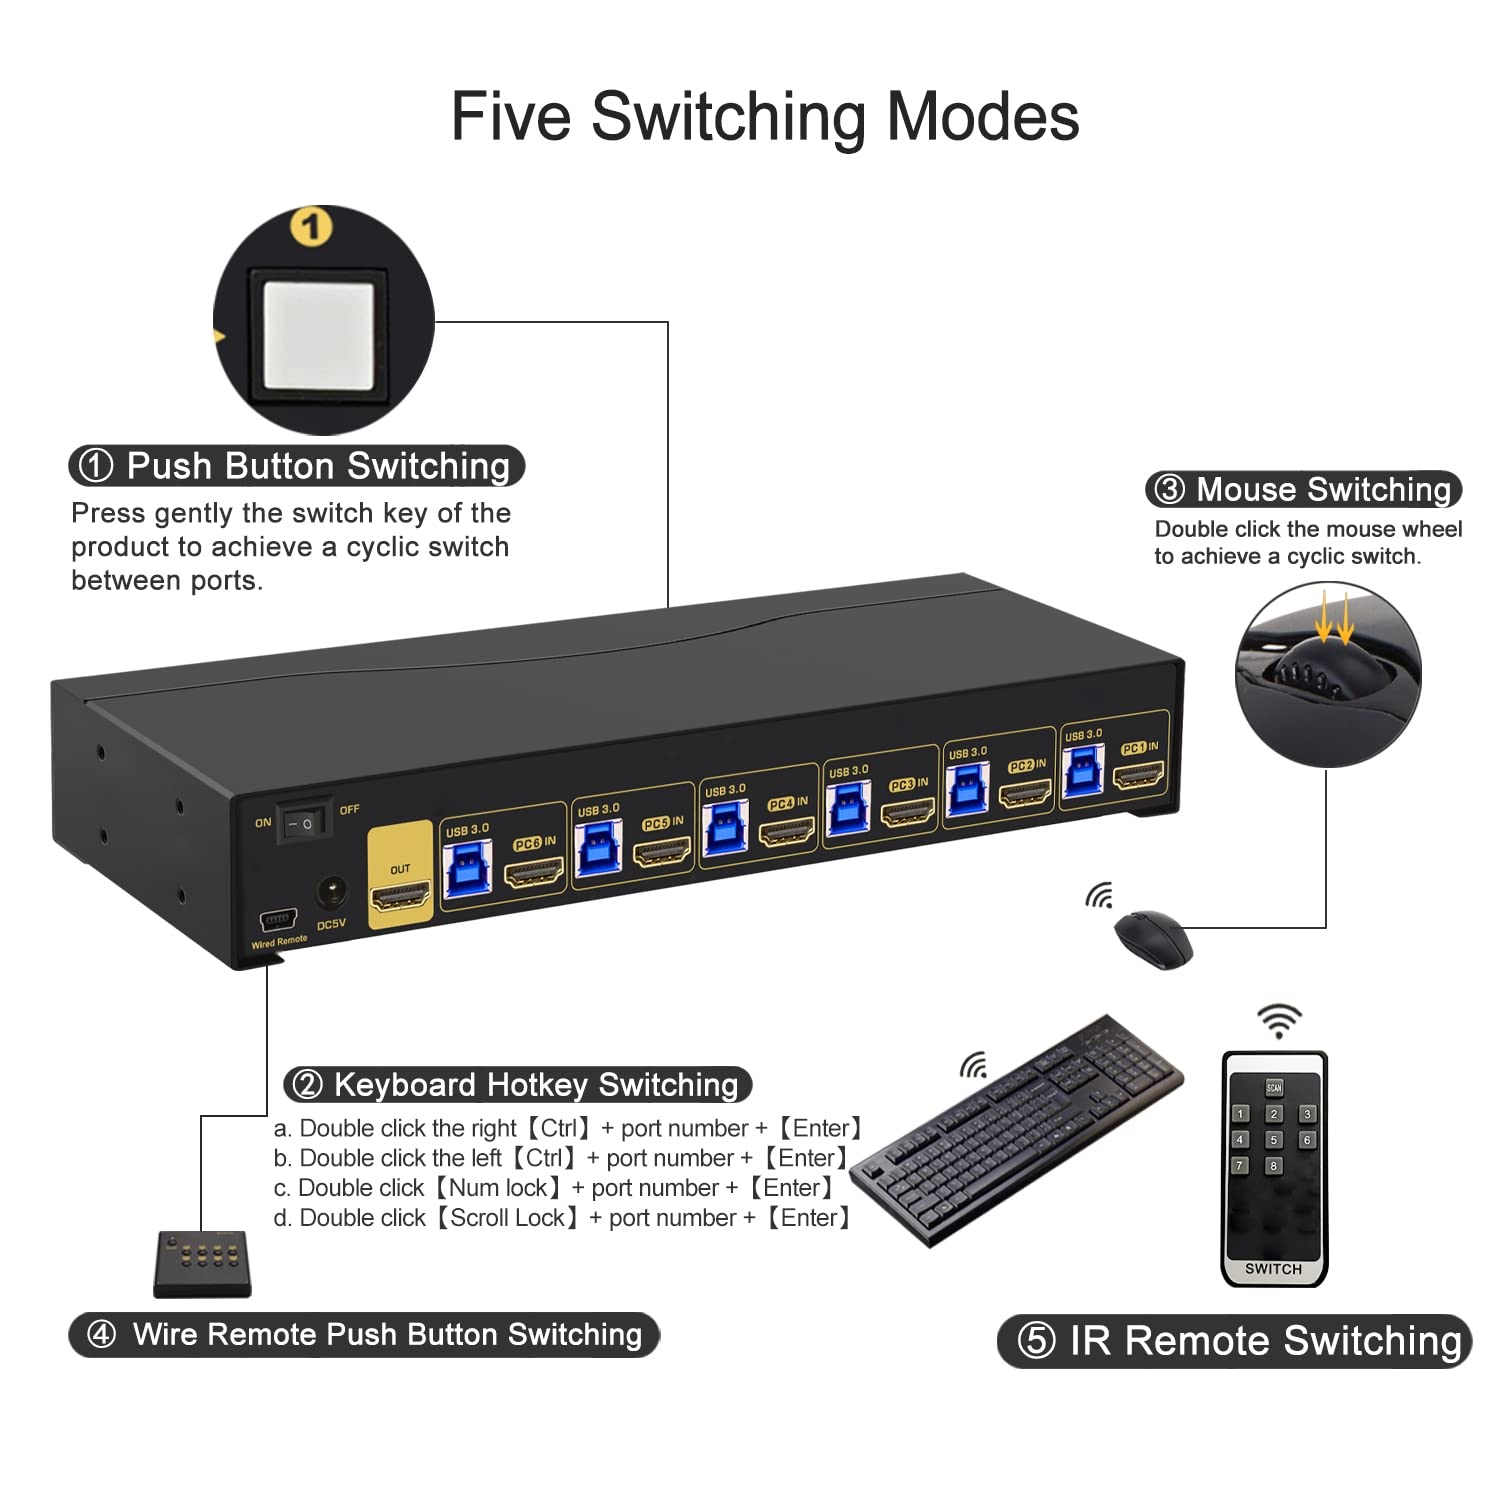 CKL 6 Port Rack Mount USB 3.0 KVM Switch HDMI 2.0 4K@60Hz with Audio and Cables